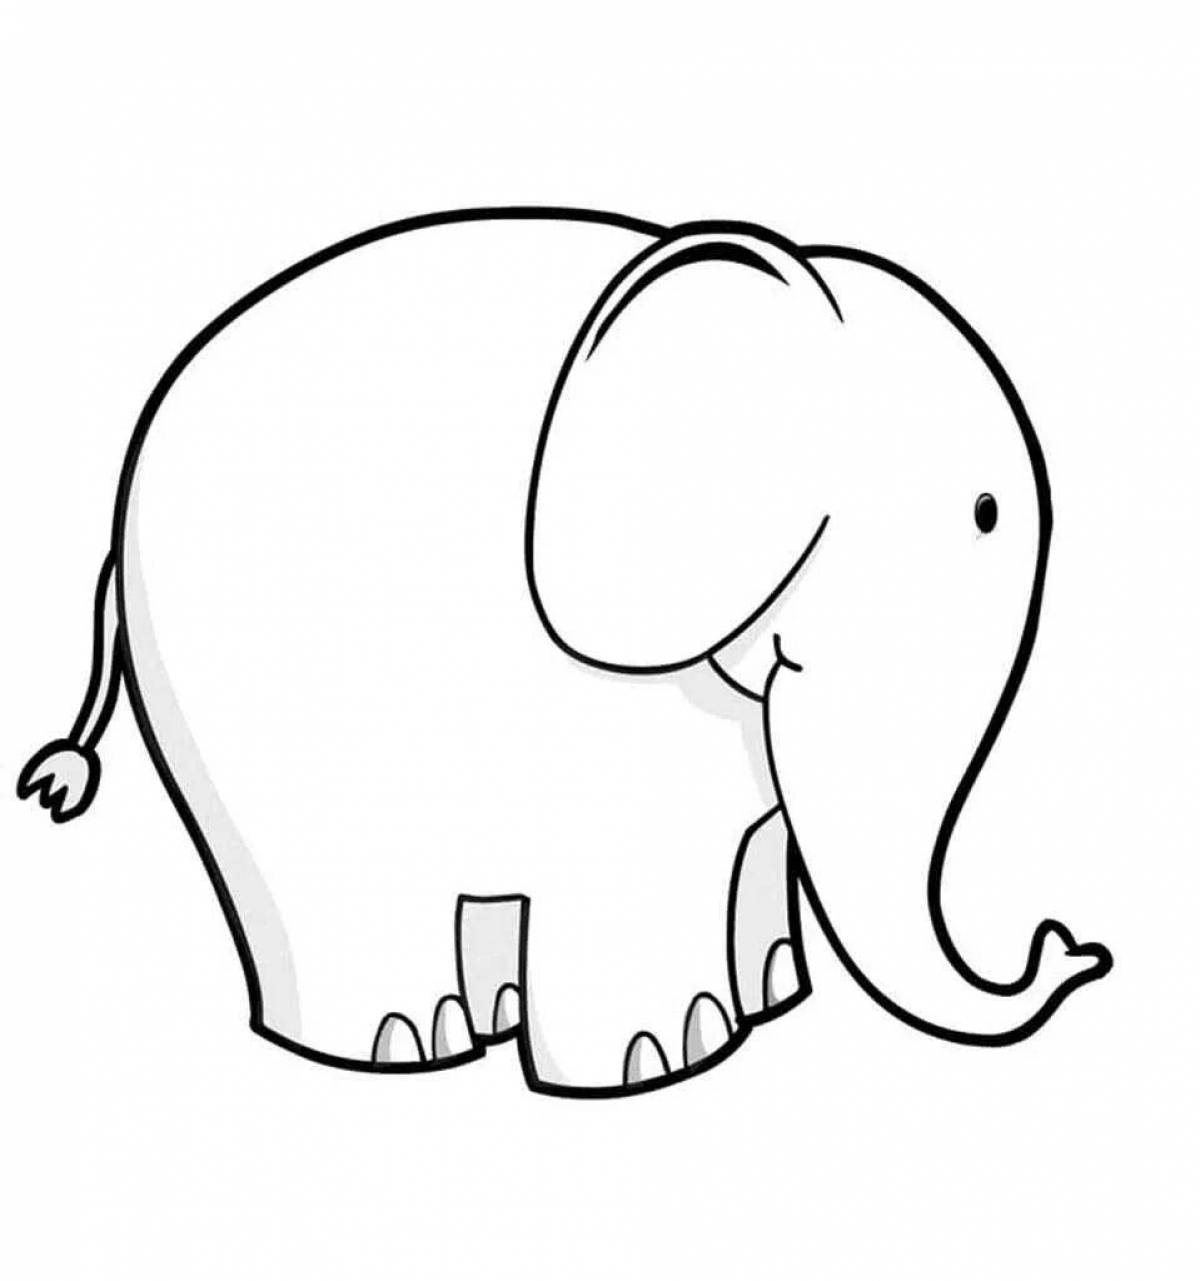 Violent drawing of an elephant